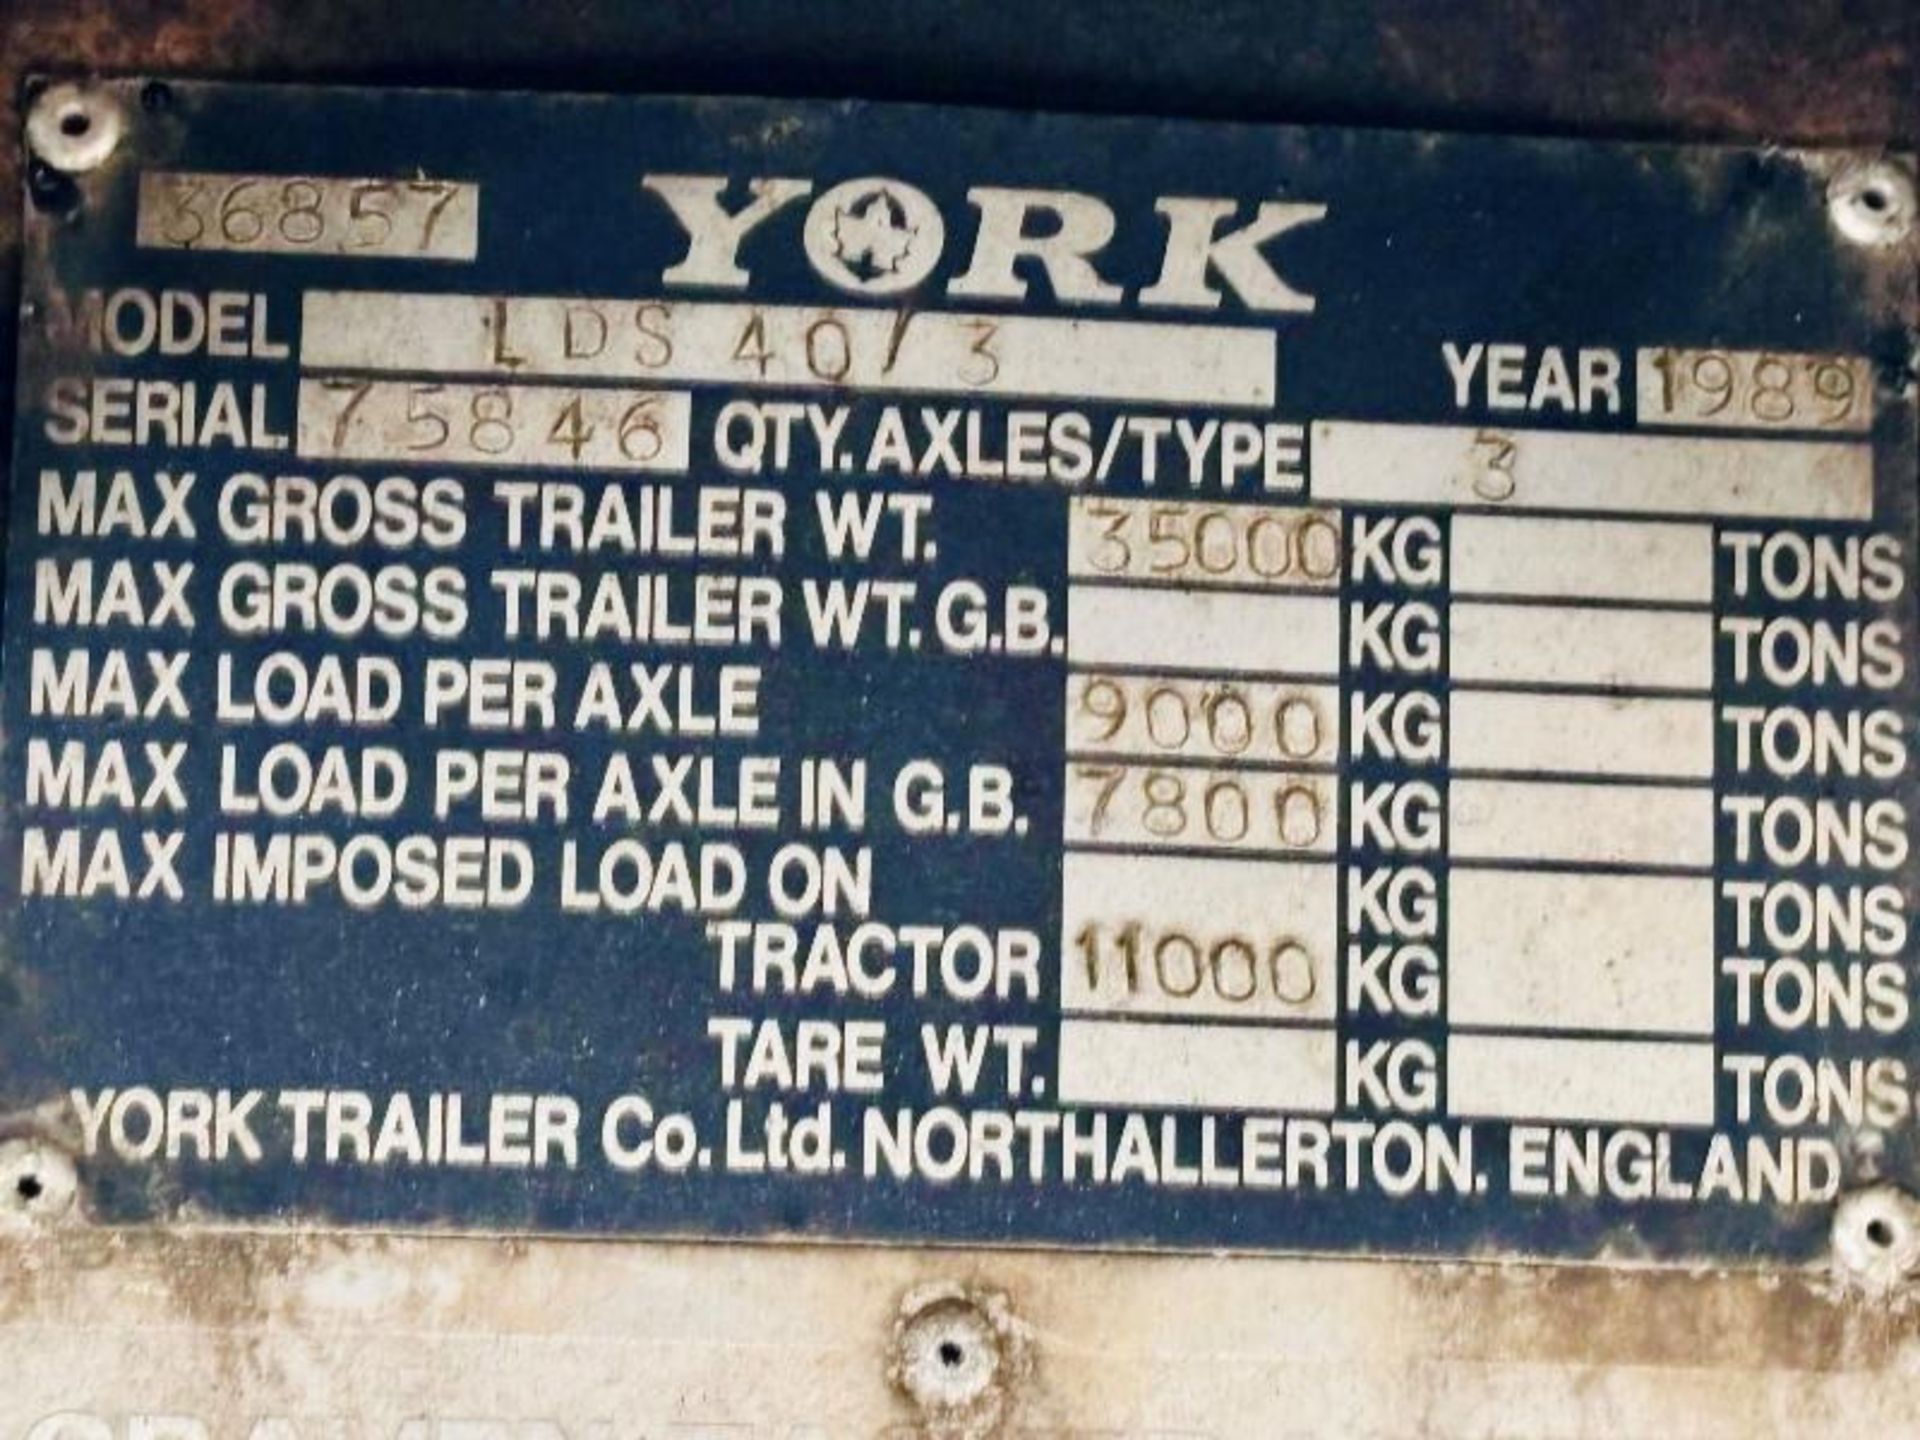 YORK LDS40/3 TRI-AXLE LOW LOADER TRAILER C/W SAF AXLES - Image 6 of 17